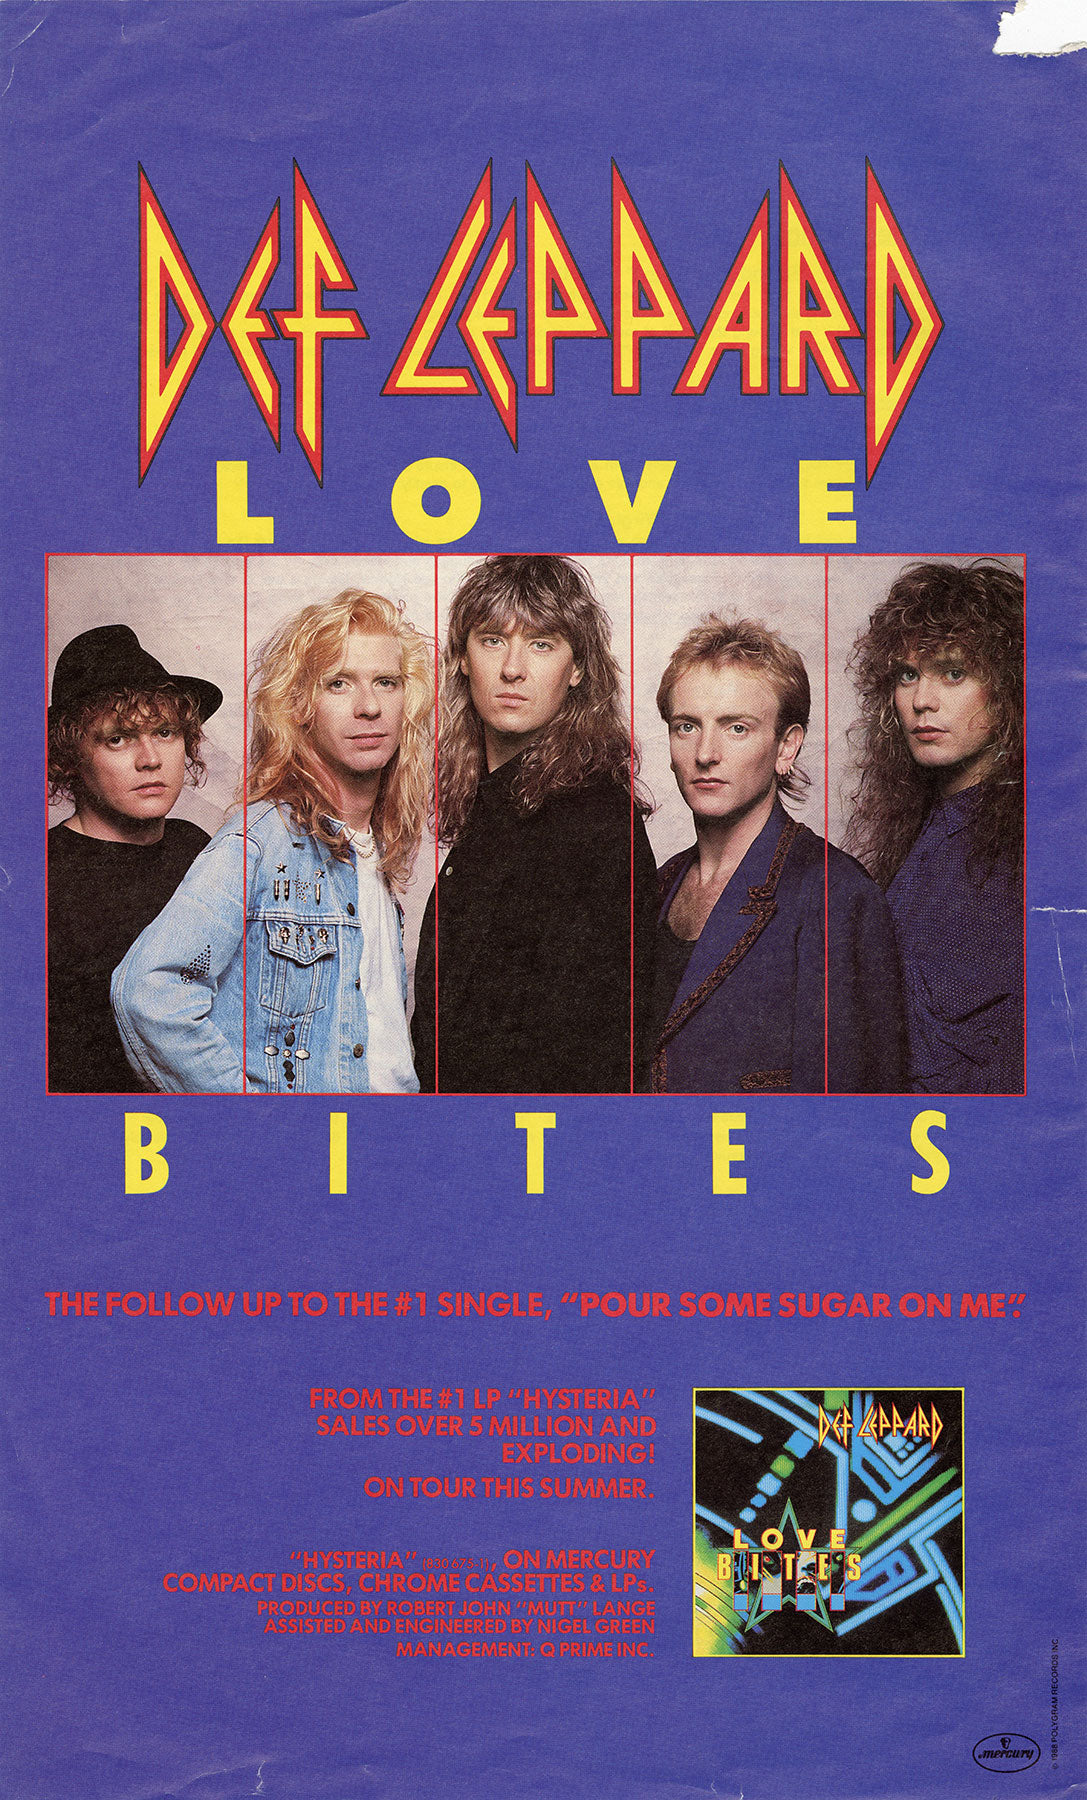 ROCK OF AGES | The Def Leppard Vault